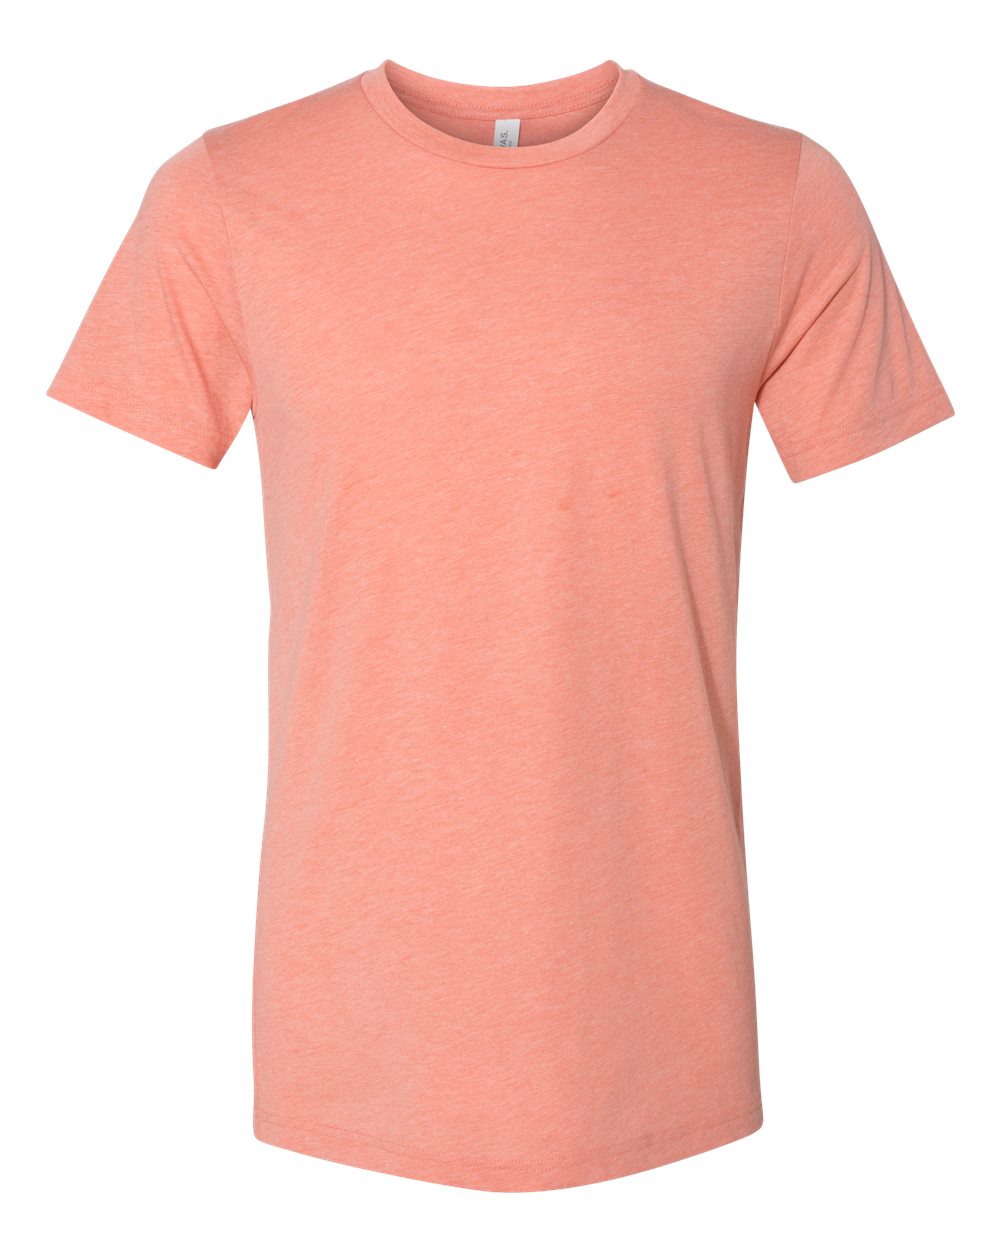 Bella + Canvas Triblend Tee (3413) in Sunset Triblend